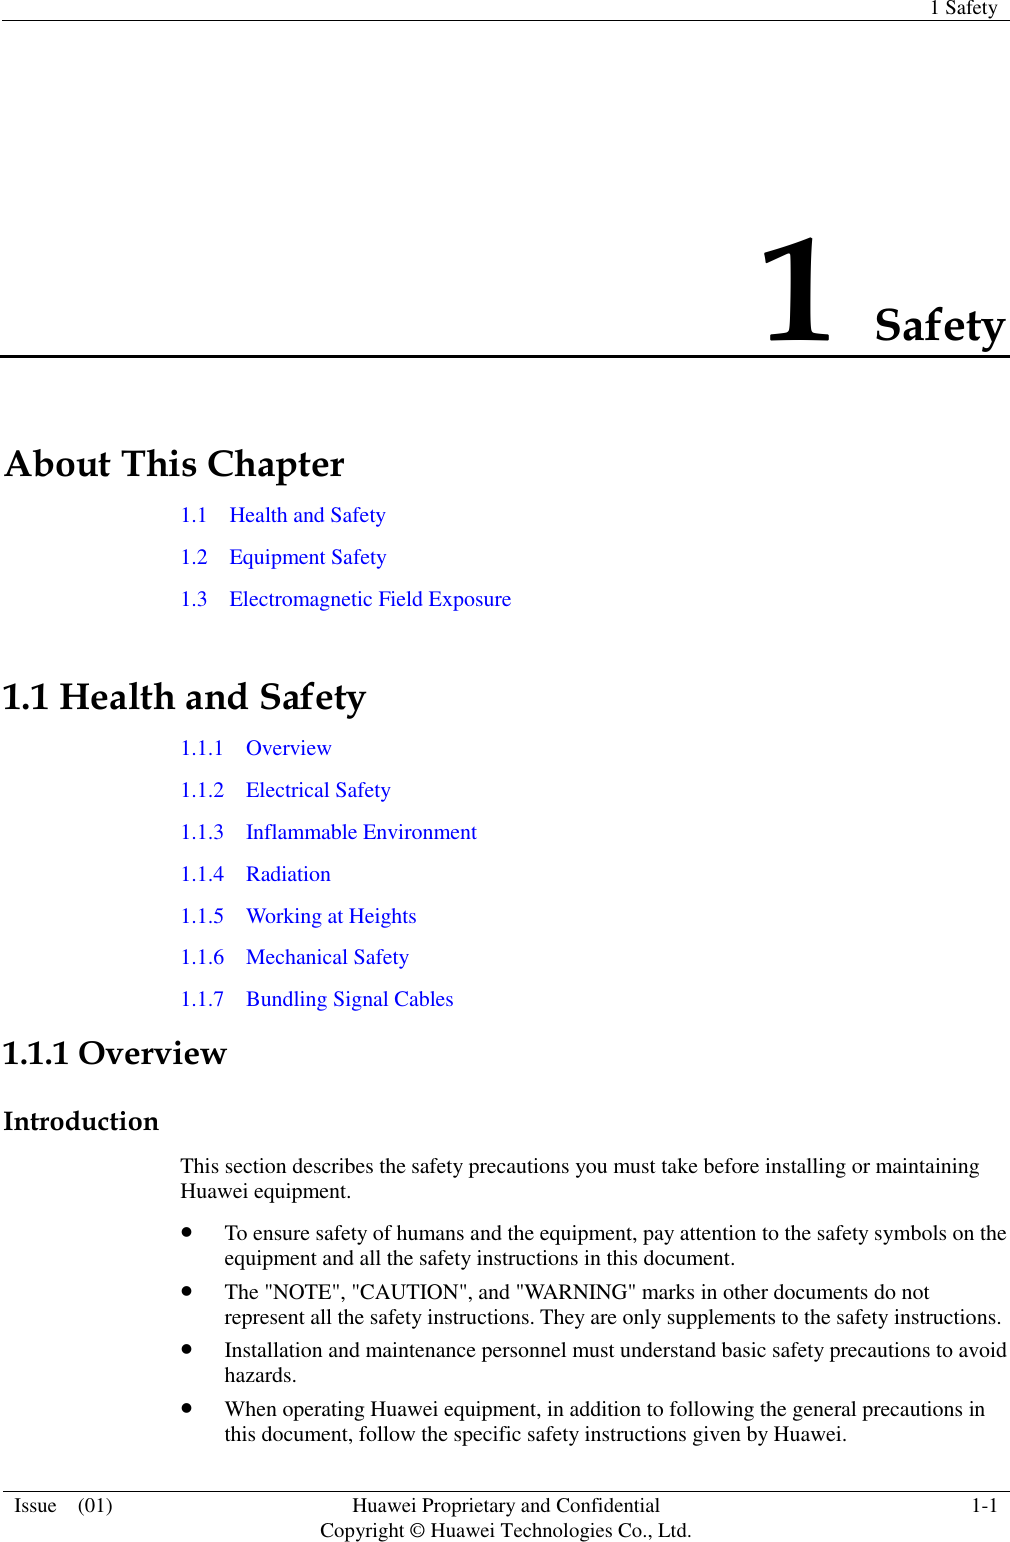   1 Safety  Issue    (01) Huawei Proprietary and Confidential                                     Copyright © Huawei Technologies Co., Ltd. 1-1  1 Safety About This Chapter 1.1    Health and Safety 1.2    Equipment Safety 1.3    Electromagnetic Field Exposure 1.1 Health and Safety 1.1.1    Overview 1.1.2    Electrical Safety 1.1.3    Inflammable Environment 1.1.4  Radiation 1.1.5  Working at Heights 1.1.6  Mechanical Safety 1.1.7  Bundling Signal Cables 1.1.1 Overview Introduction This section describes the safety precautions you must take before installing or maintaining Huawei equipment.  To ensure safety of humans and the equipment, pay attention to the safety symbols on the equipment and all the safety instructions in this document.  The &quot;NOTE&quot;, &quot;CAUTION&quot;, and &quot;WARNING&quot; marks in other documents do not represent all the safety instructions. They are only supplements to the safety instructions.  Installation and maintenance personnel must understand basic safety precautions to avoid hazards.  When operating Huawei equipment, in addition to following the general precautions in this document, follow the specific safety instructions given by Huawei. 